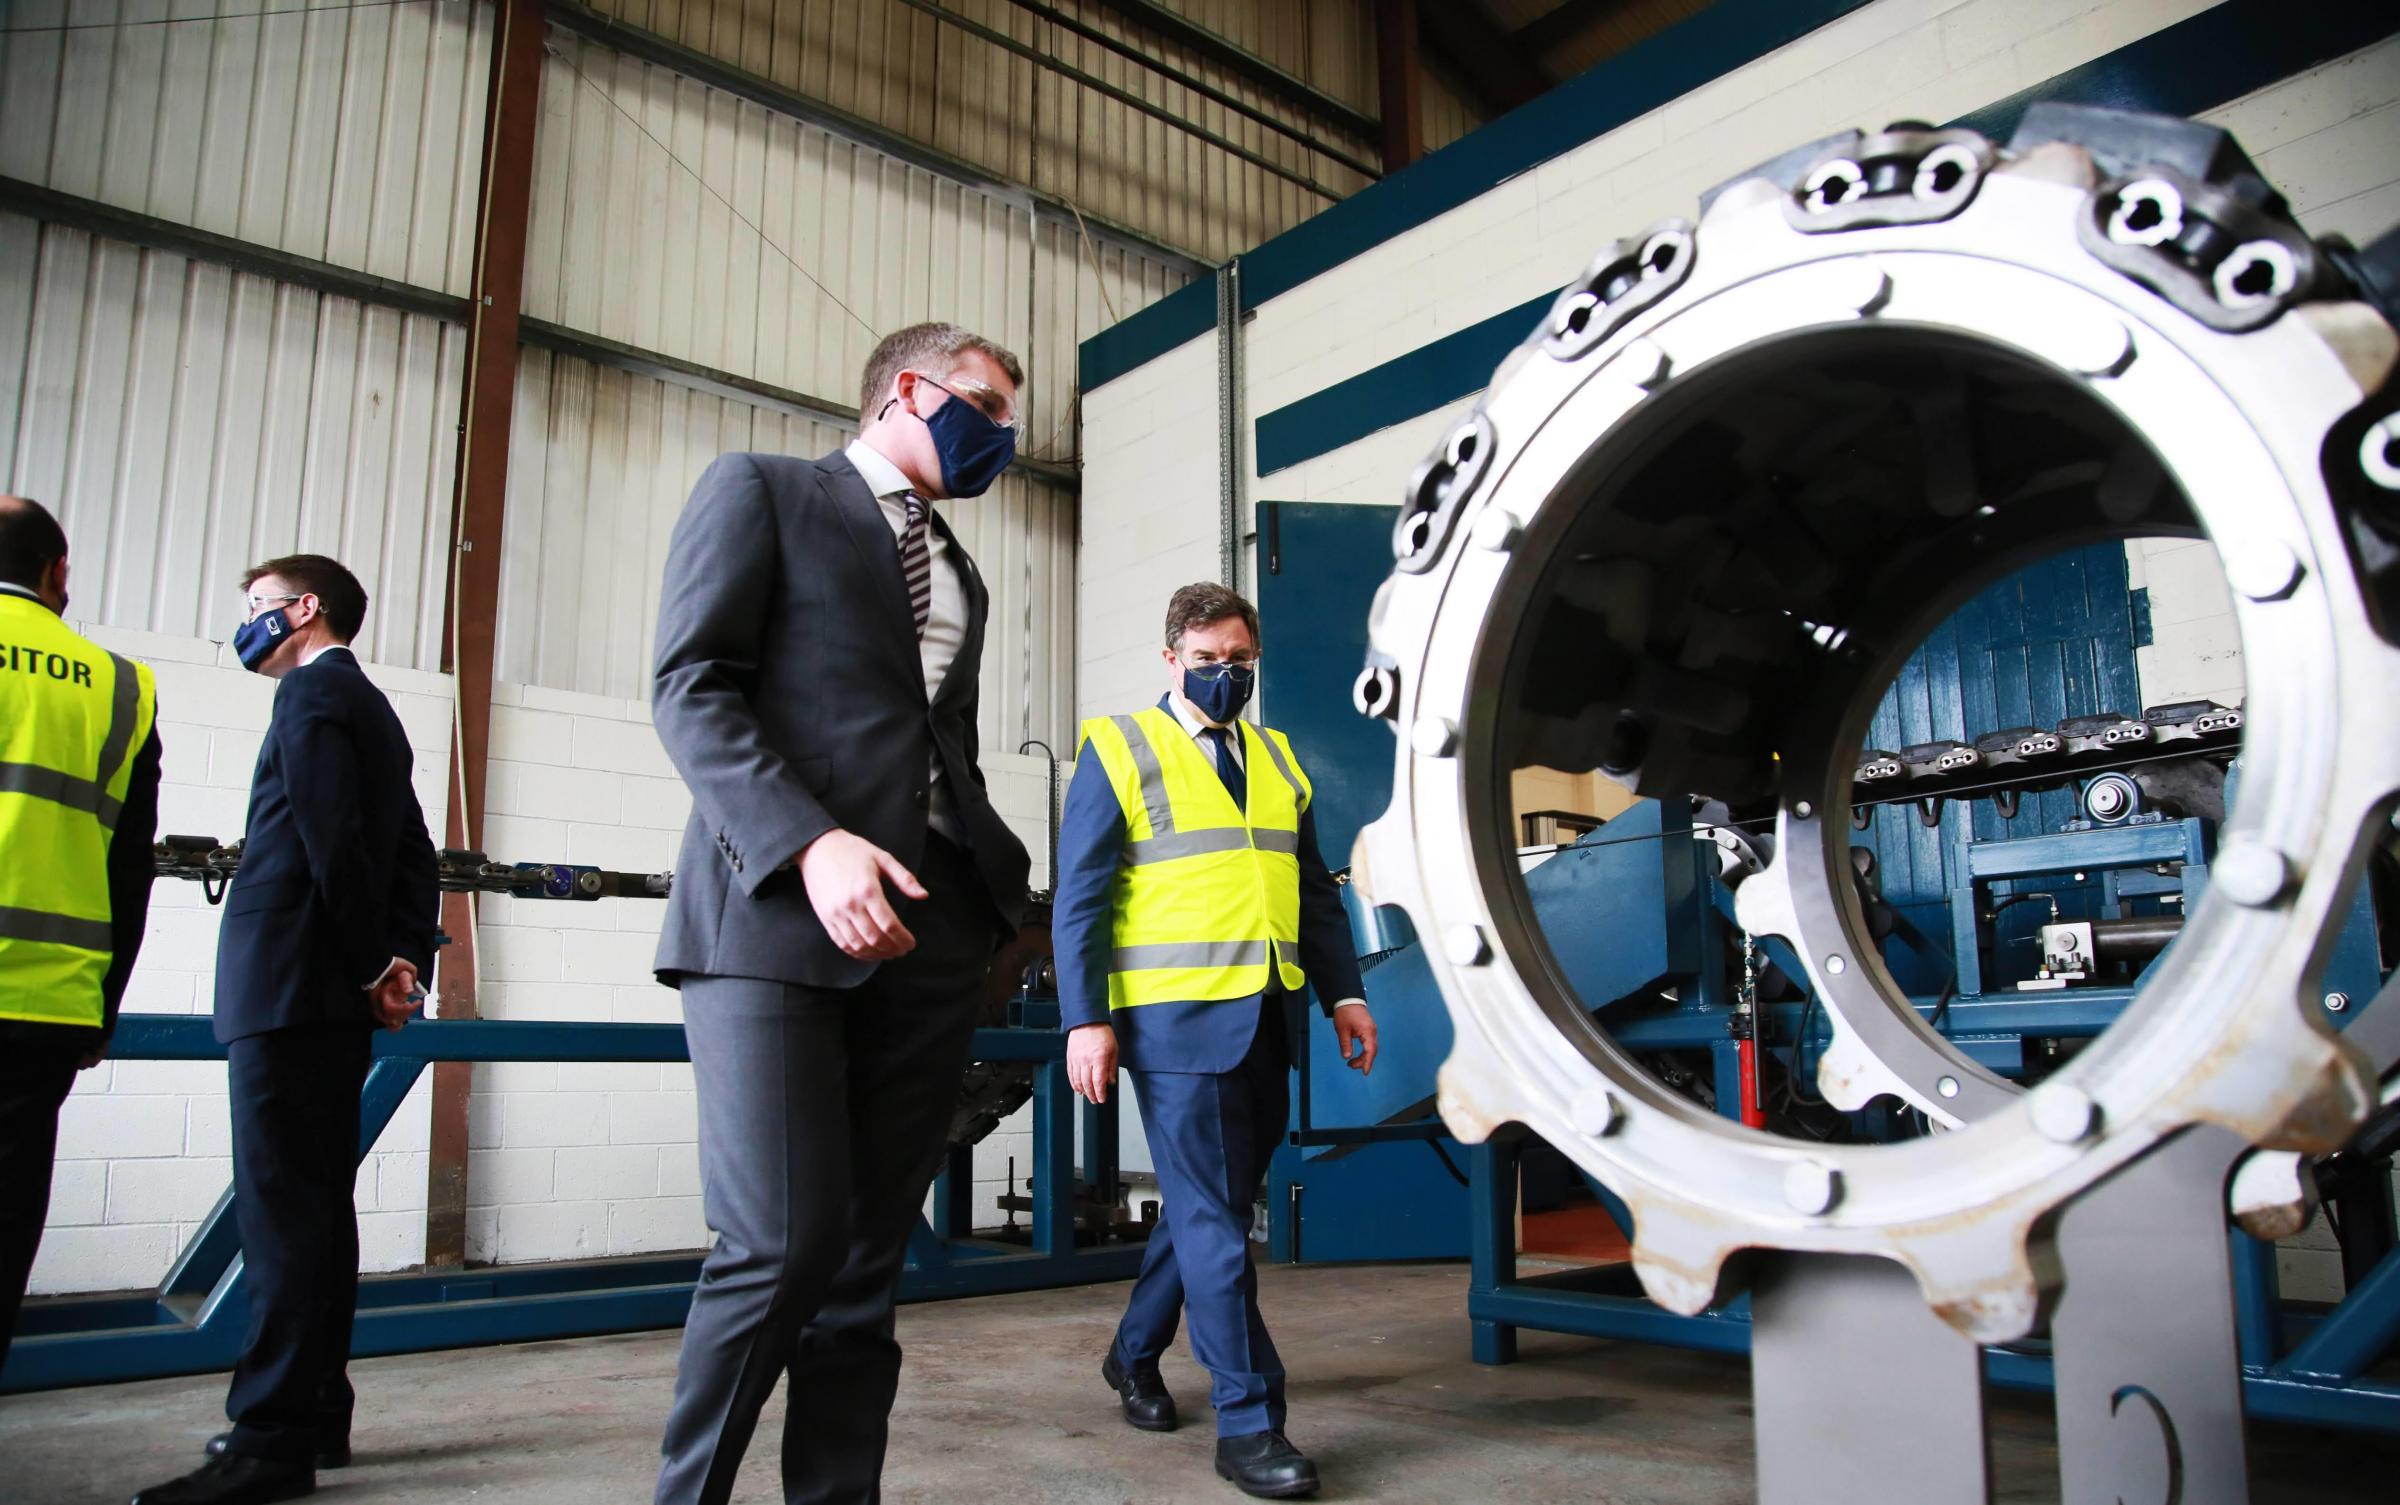 The Minister of Defence Procurement, Jeremy Quin, at Cook Defence Systems, Stanhope, County Durham pictured with William Cook, Group Commercial Director Picture: SARAH CALDECOTT